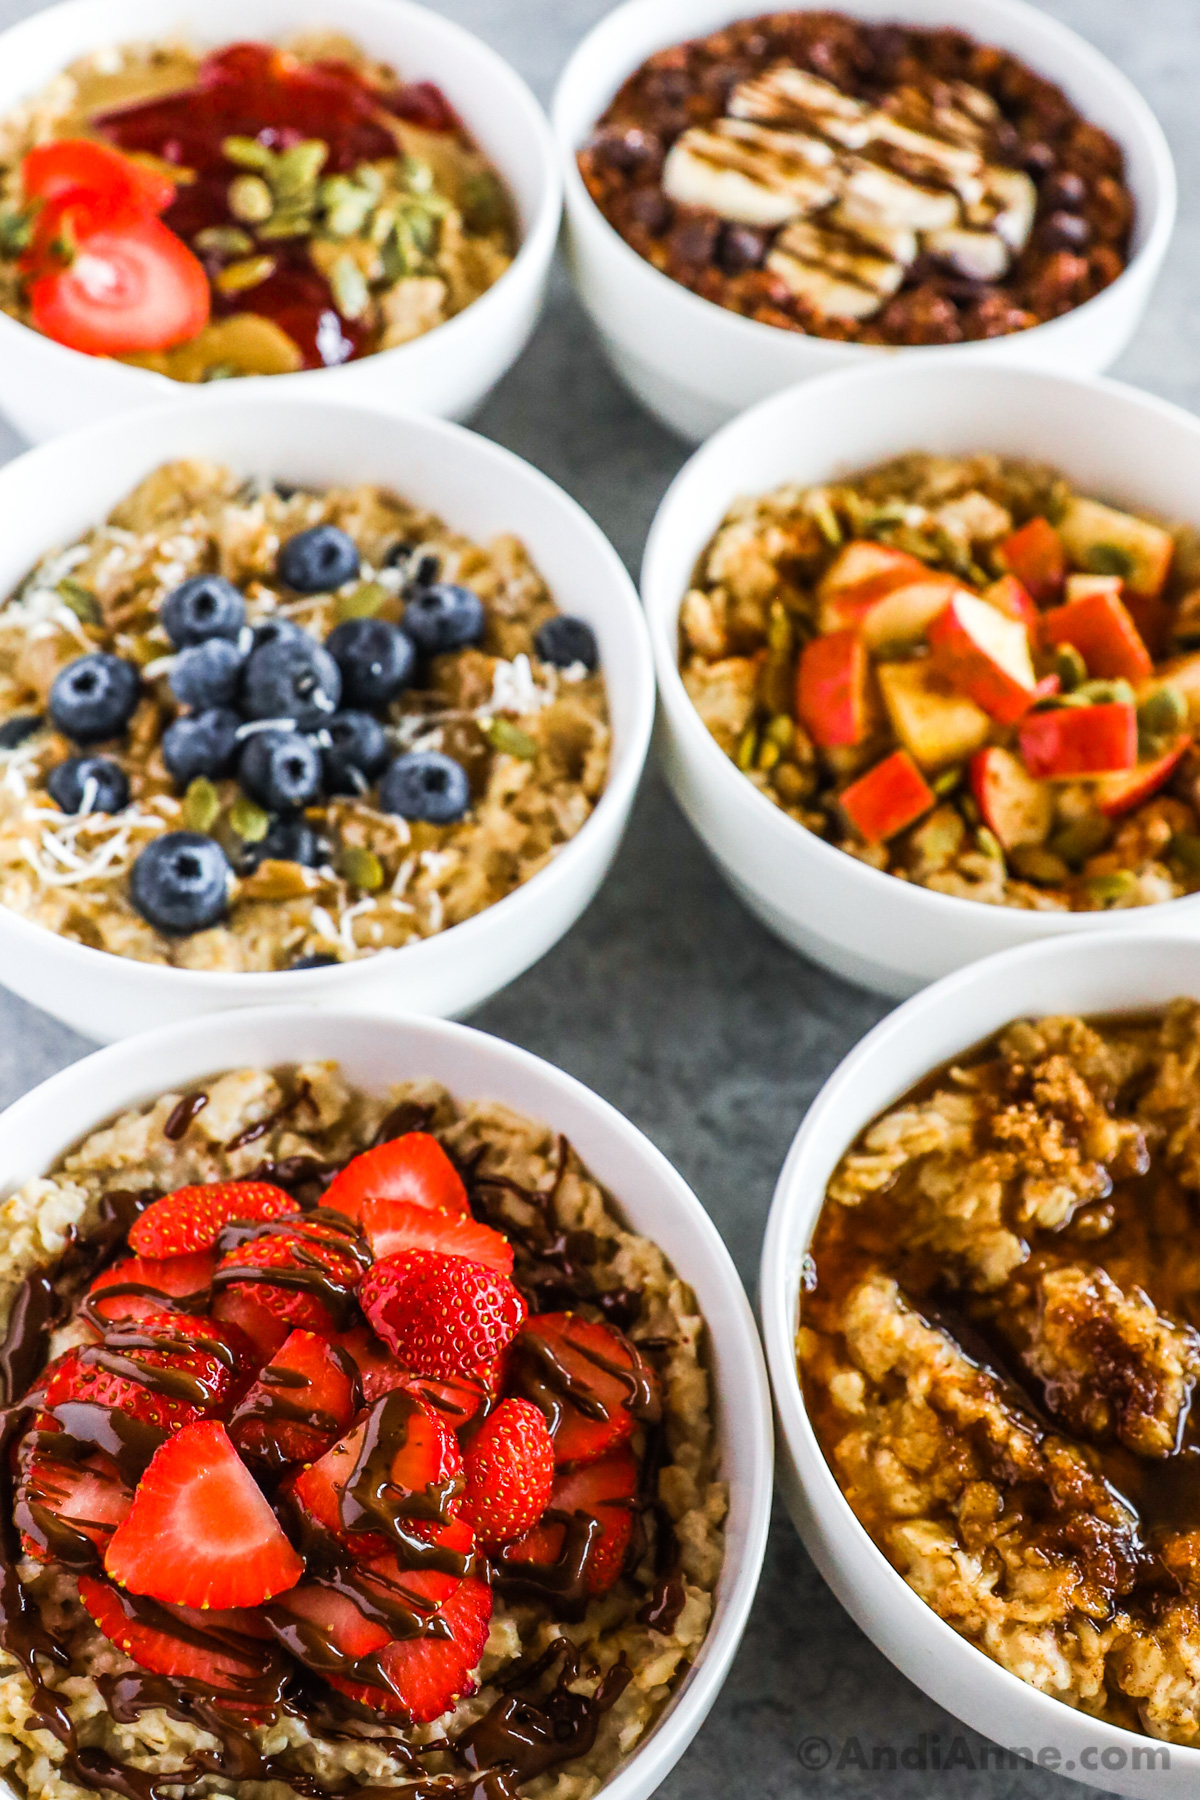 Close up of bowls of oatmeal flavors including strawberry drizzle with nutella, blueberries, chopped apple, chocolate with banana, peanut butter and jam.